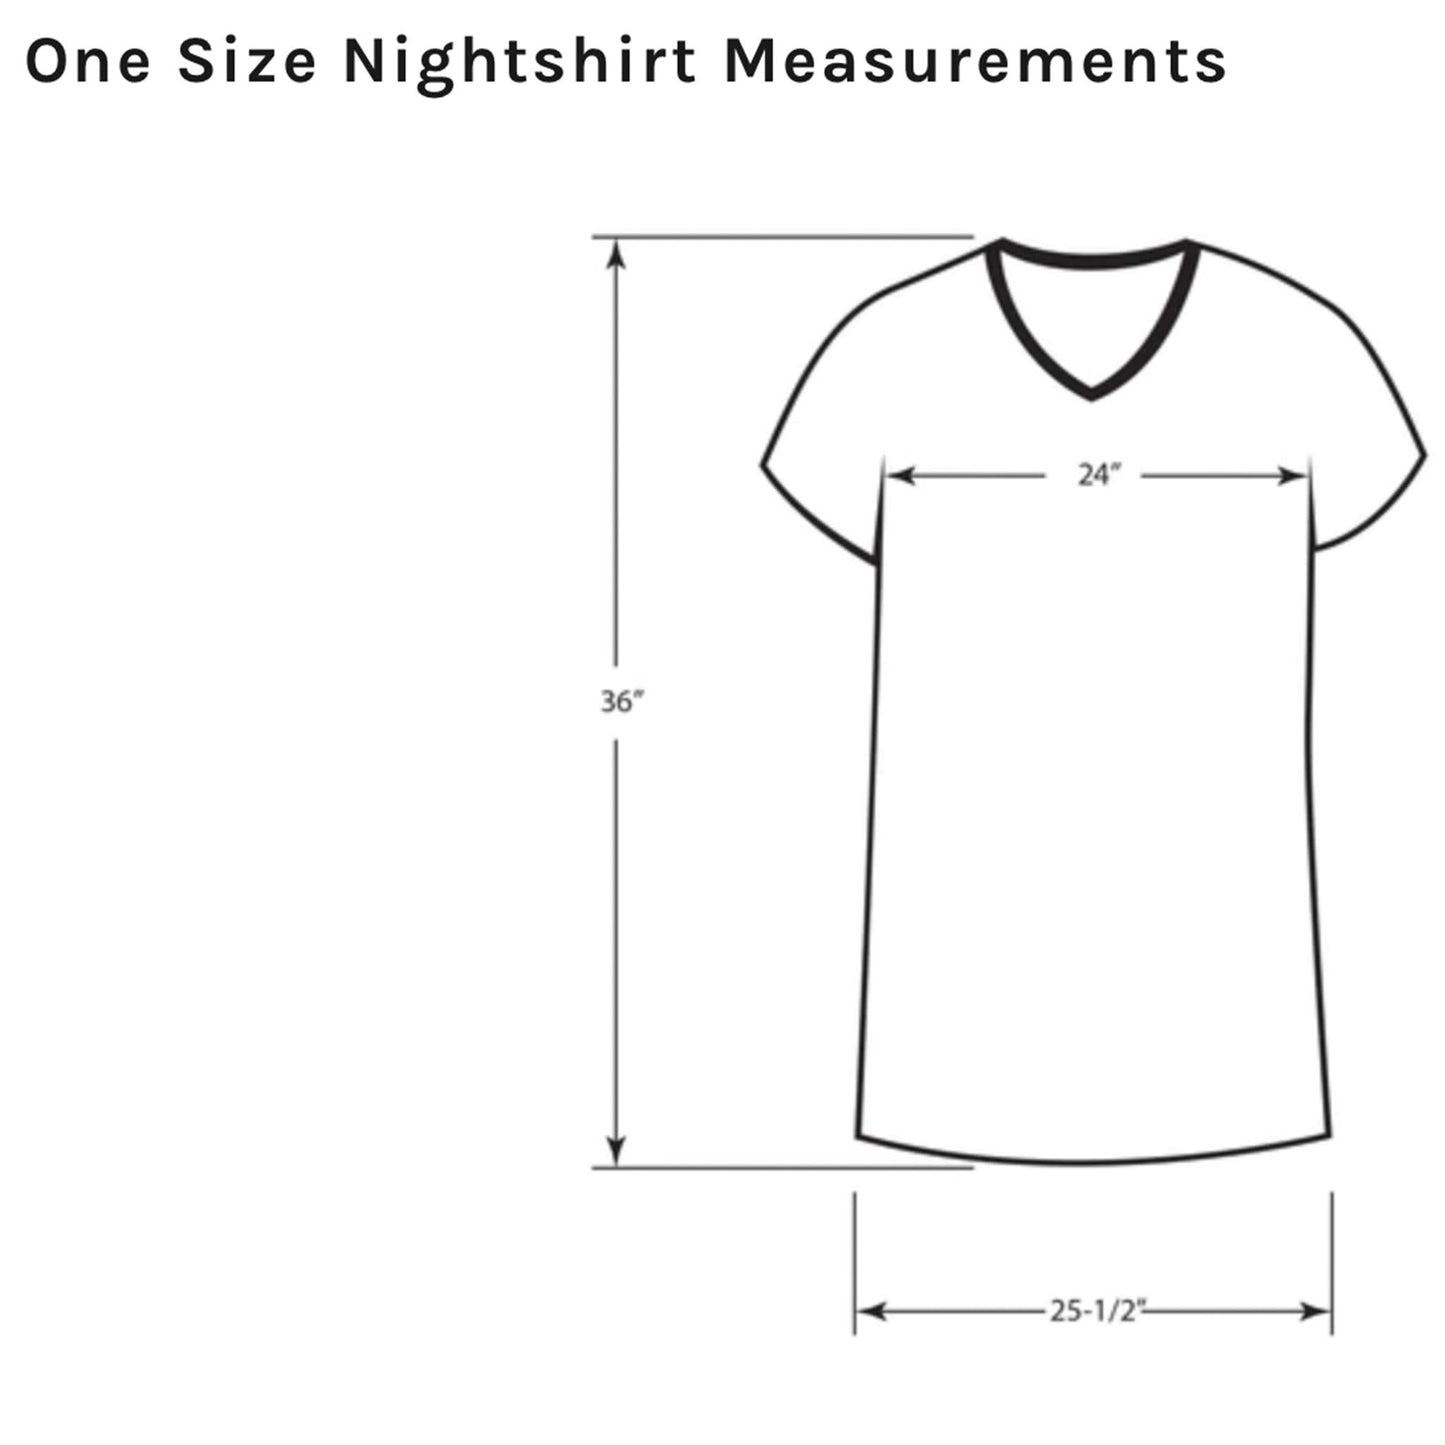 Emerson Street Clothing | Hold Me, Hug Me, Squeeze Me...Pretend That I'm a Remote Control | Nightshirt in a Bag